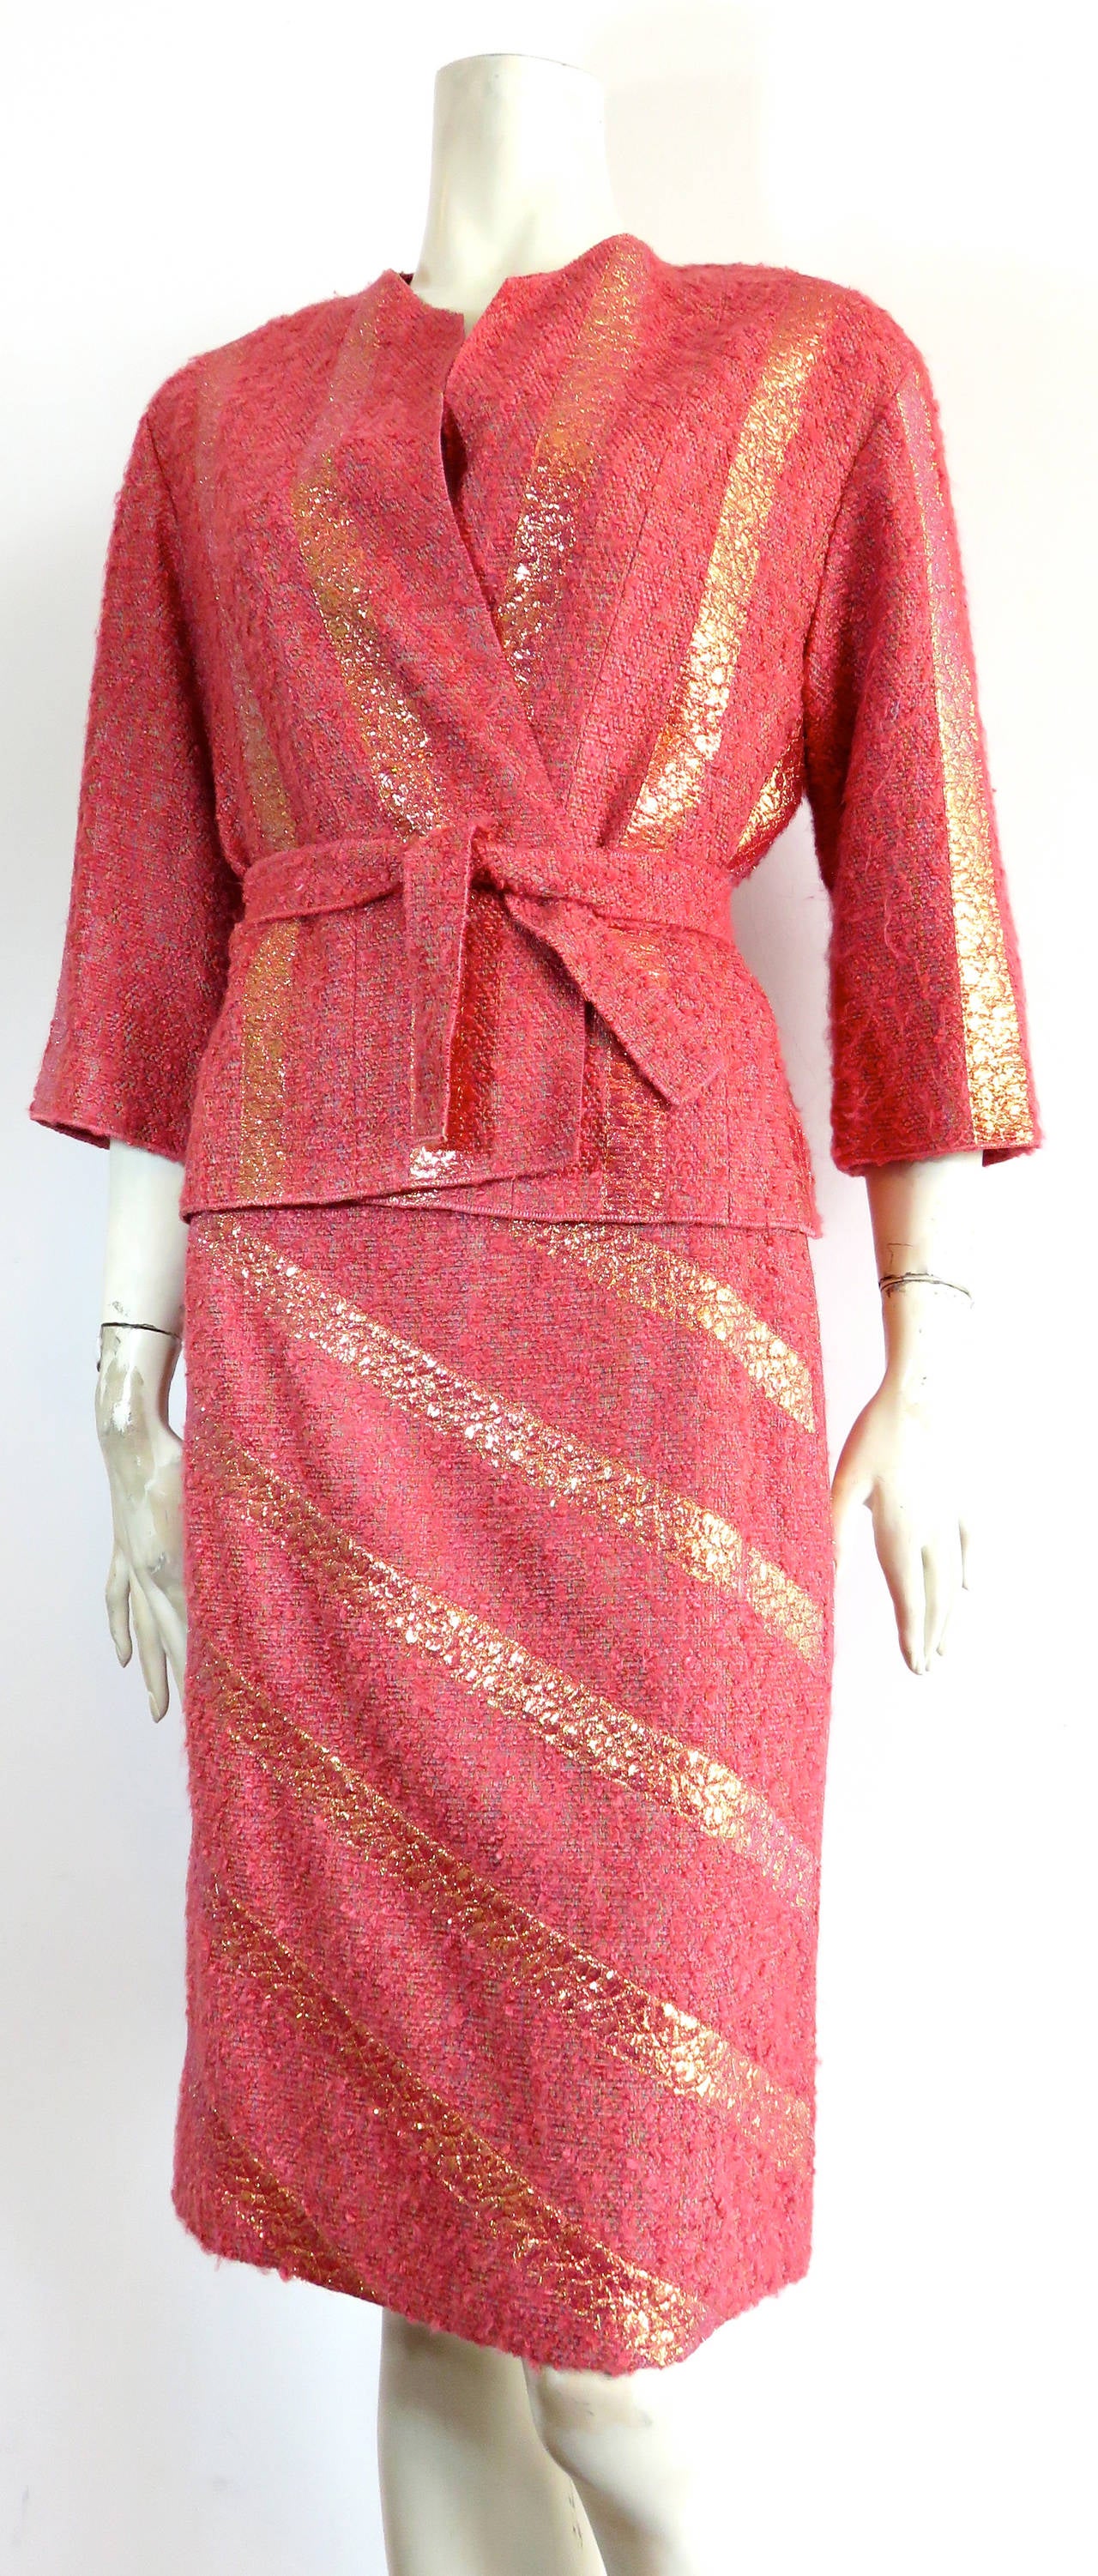 Like new, CHANEL PARIS coral shine stripe bouclé 2pc. skirt suit with gorgeous, 'cellophane' style stripes.

The skirt suit was worn once, and is in like new condition with absolutely no signs of wear of damages.

This beautiful skirt suit